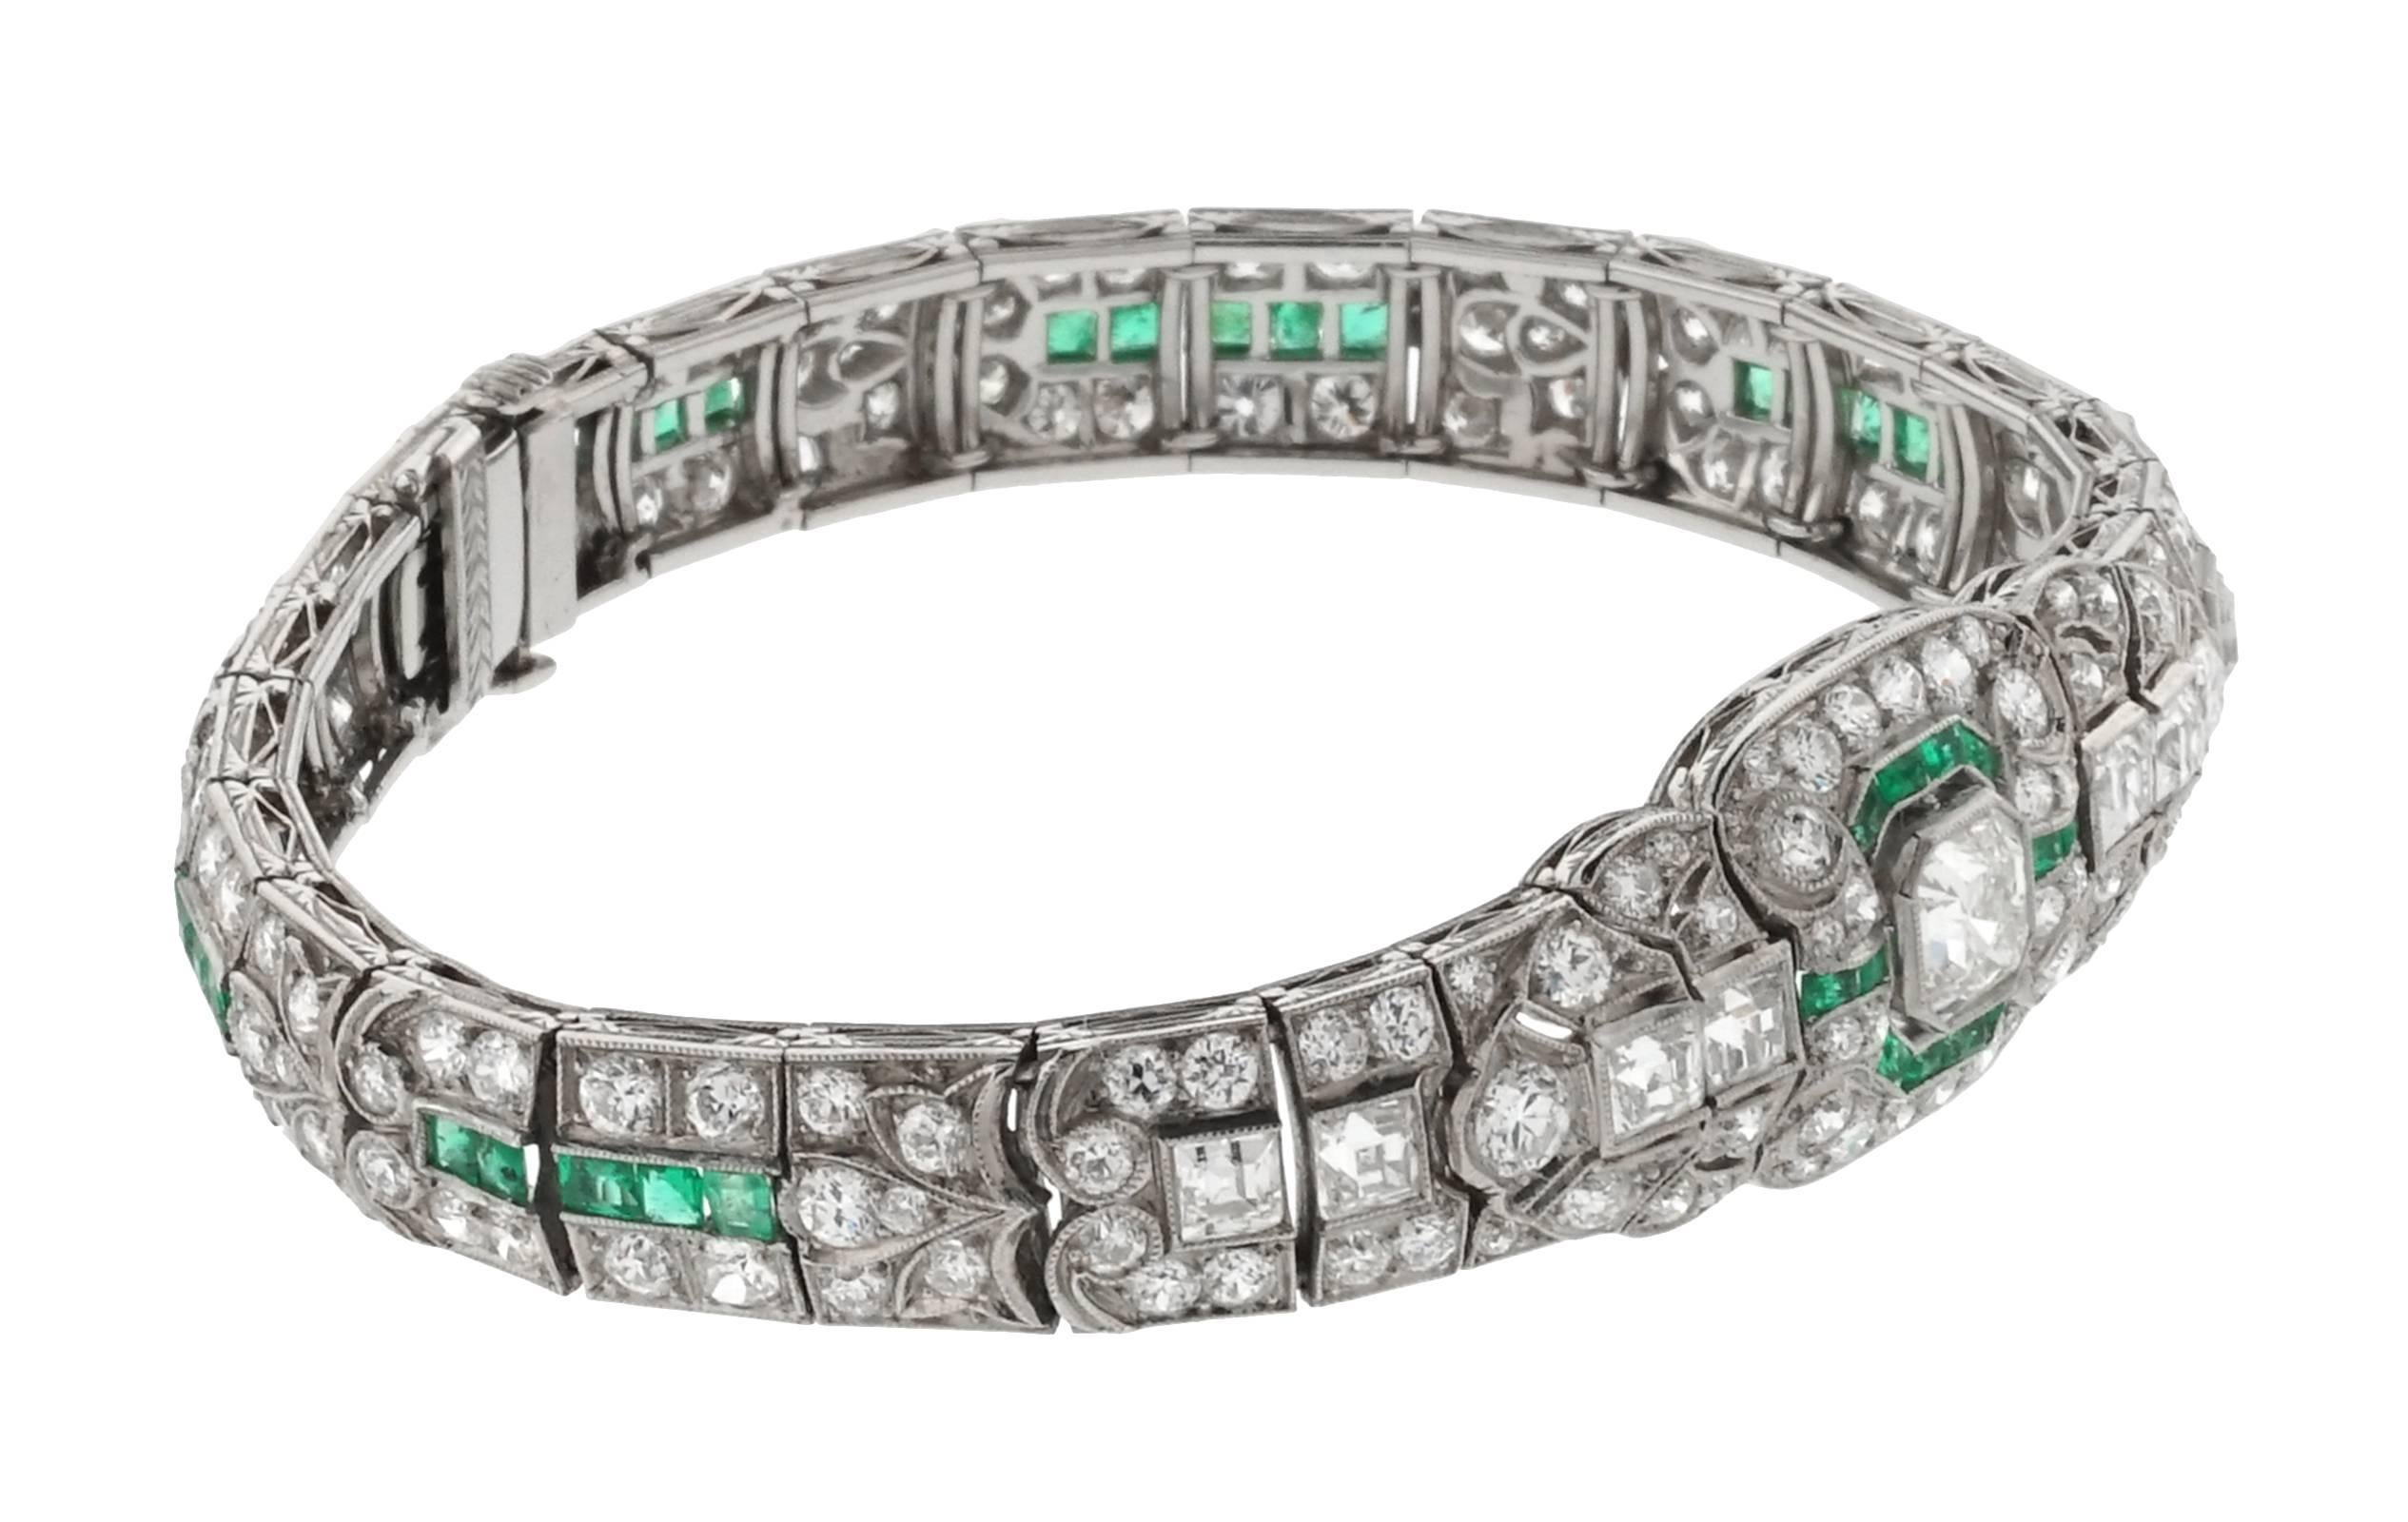 This bracelet is 7 inches in length, made of platinum, and weighs 24.60 DWT (approx. 38.26 grams). It contains one asscher I color, SI1 clarity diamond weighing 1.10 CTTW, 8 square H-I color, VS clarity diamonds weighing 2.00 CTTW, 162 european G-H